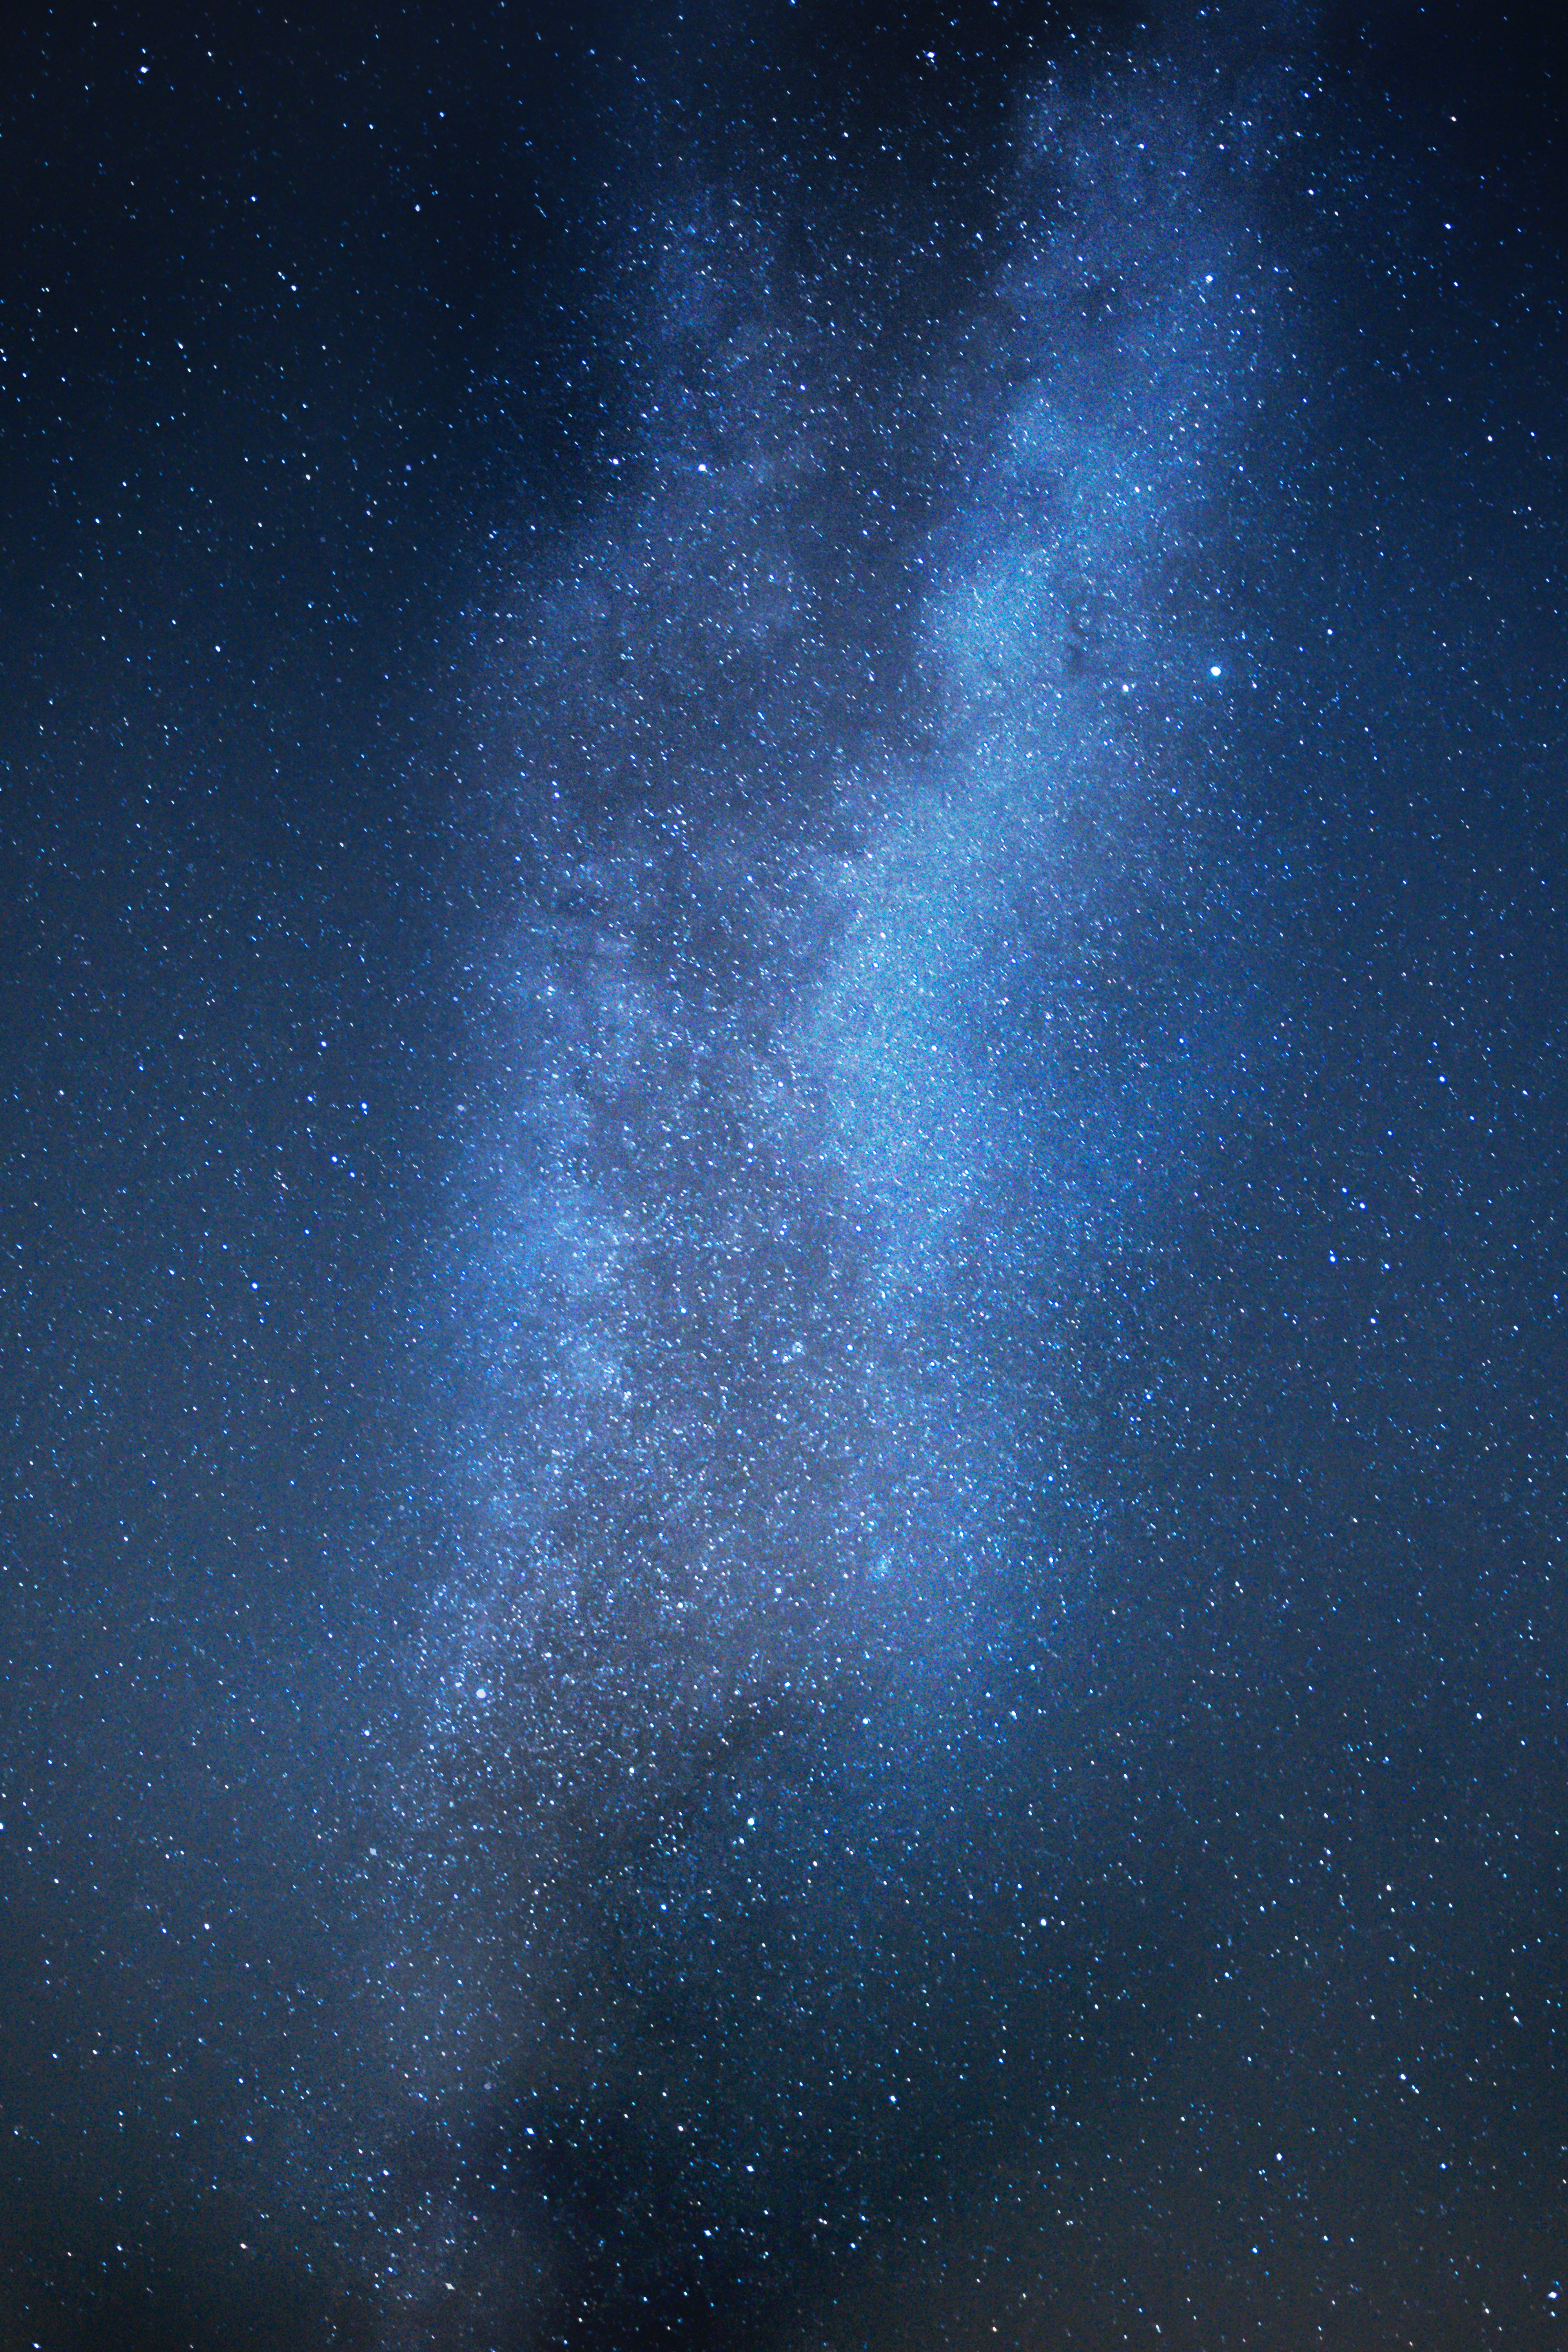 The Milky Way gleaming with blue and silver light